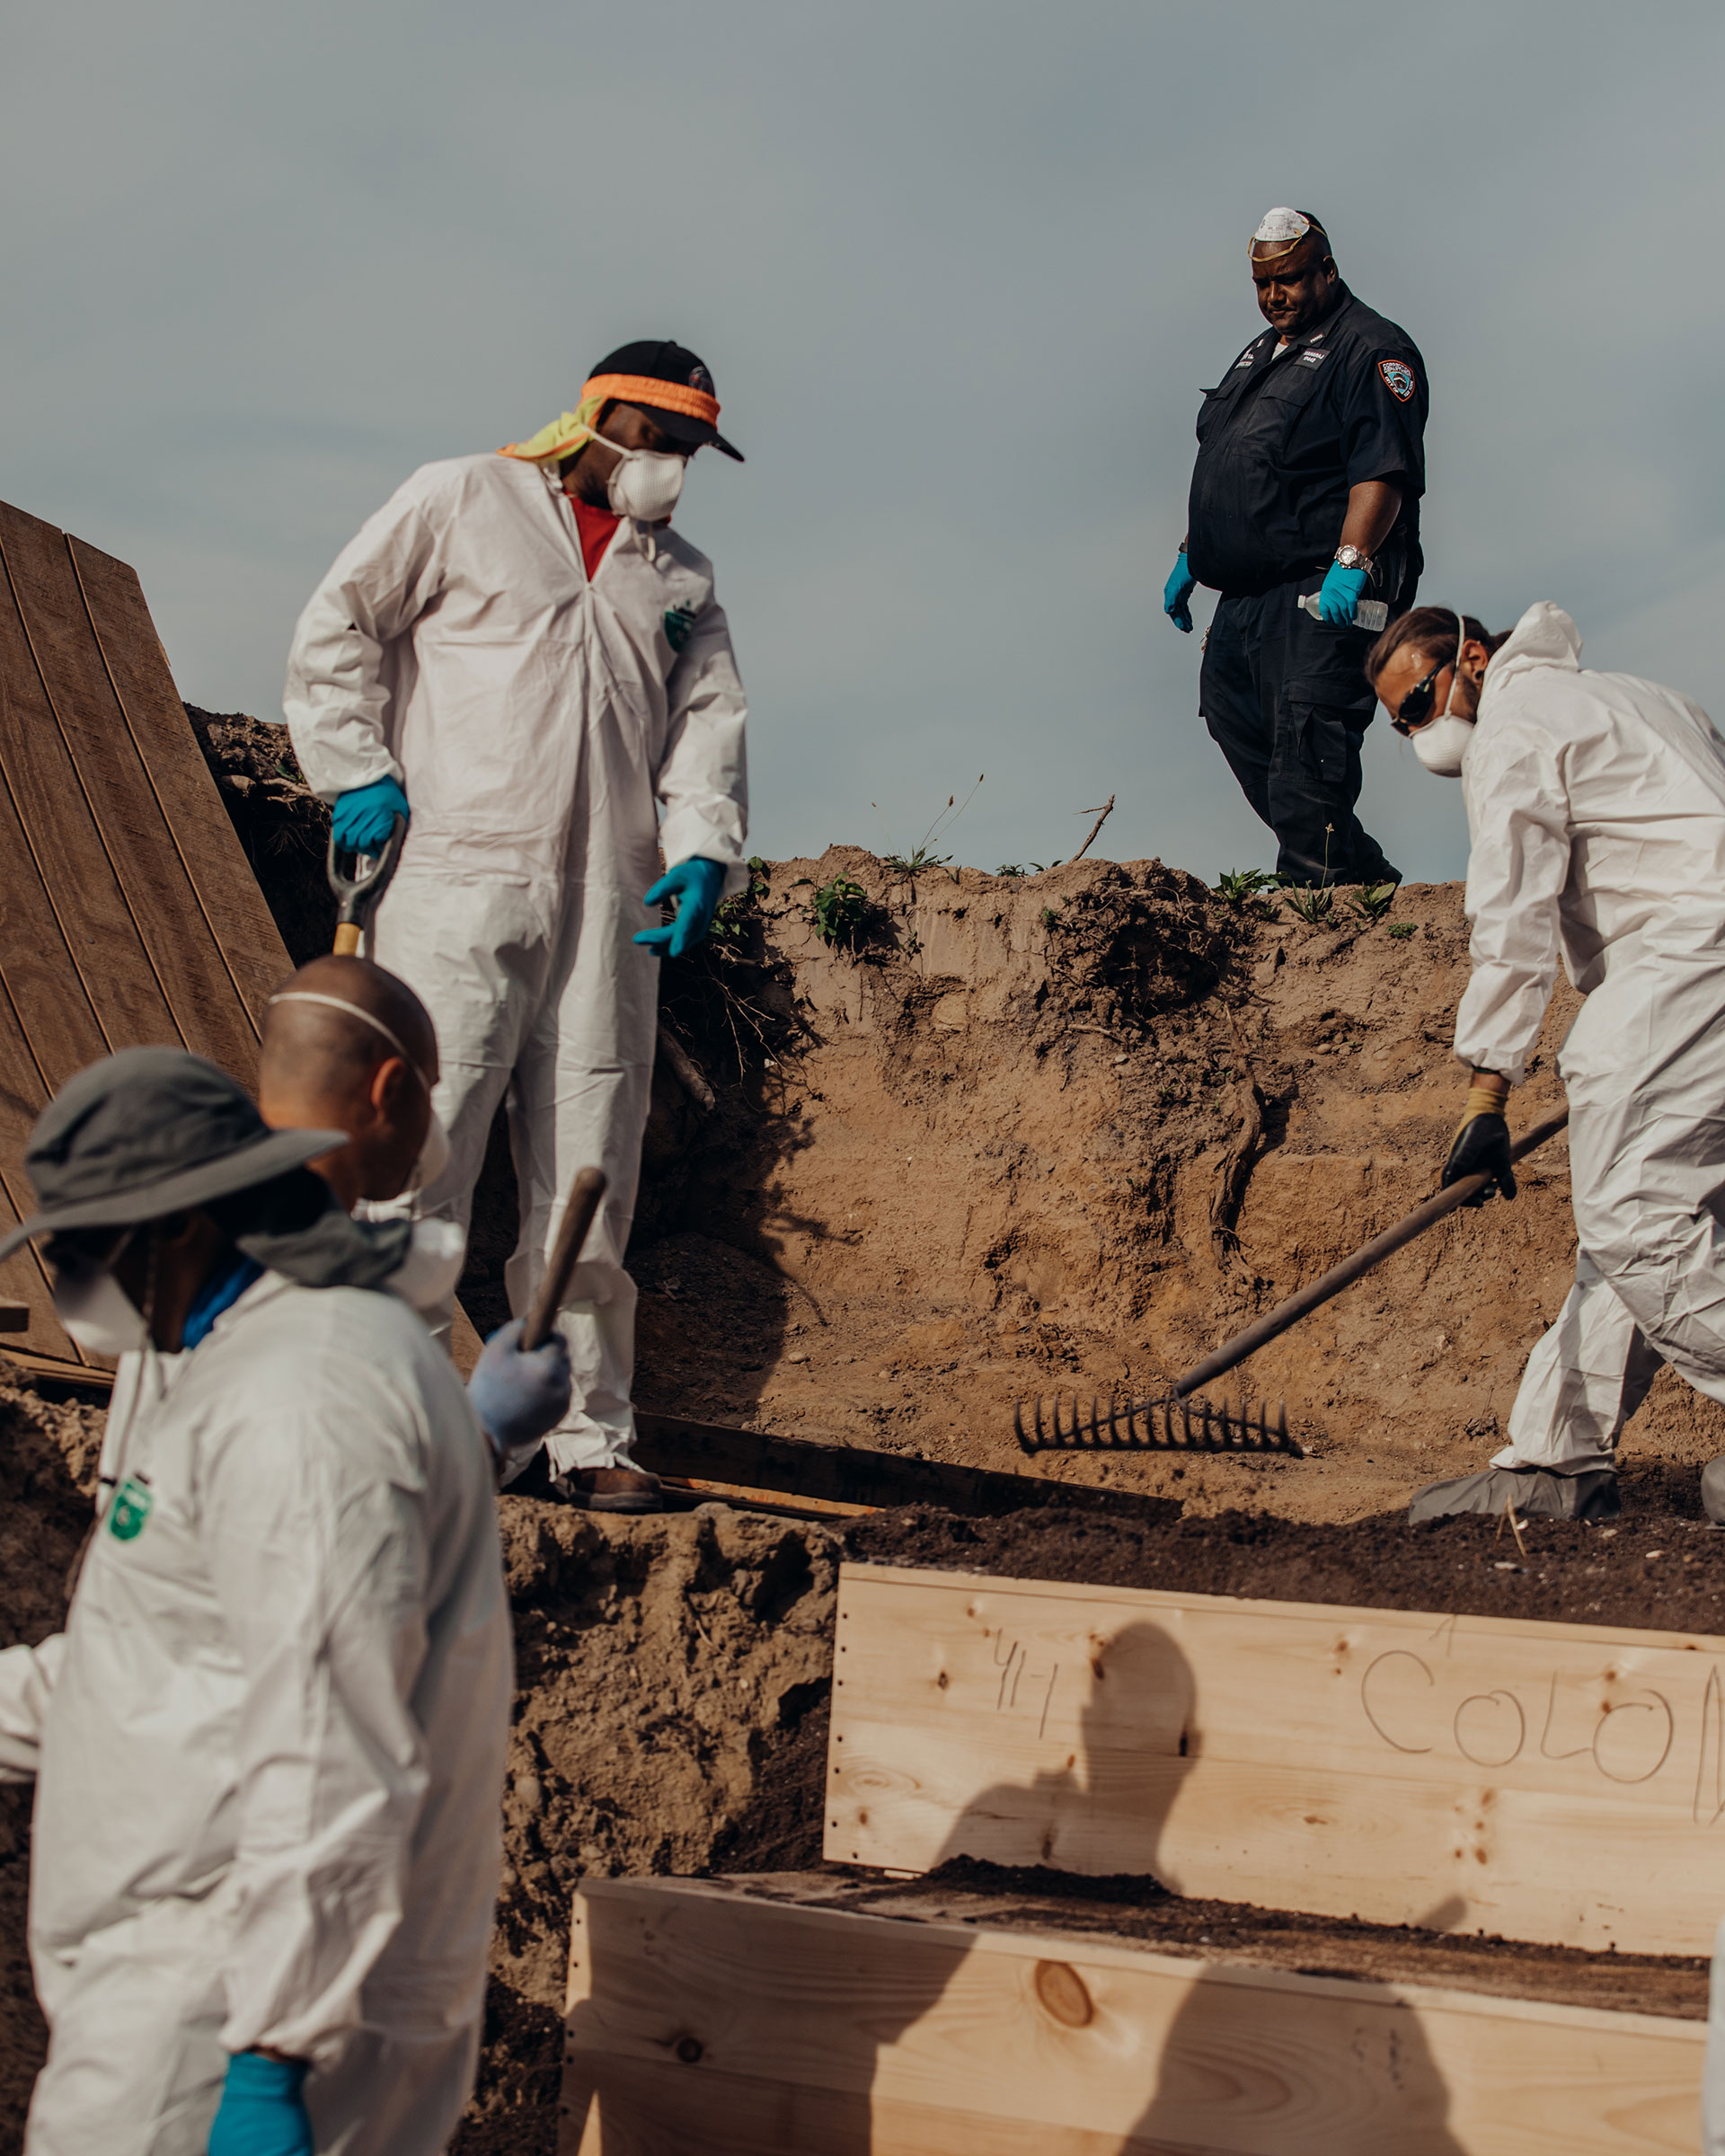 Workers place pine caskets inside a mass grave on Hart Island while correction officers look on. (Sasha Arutyunova for TIME)